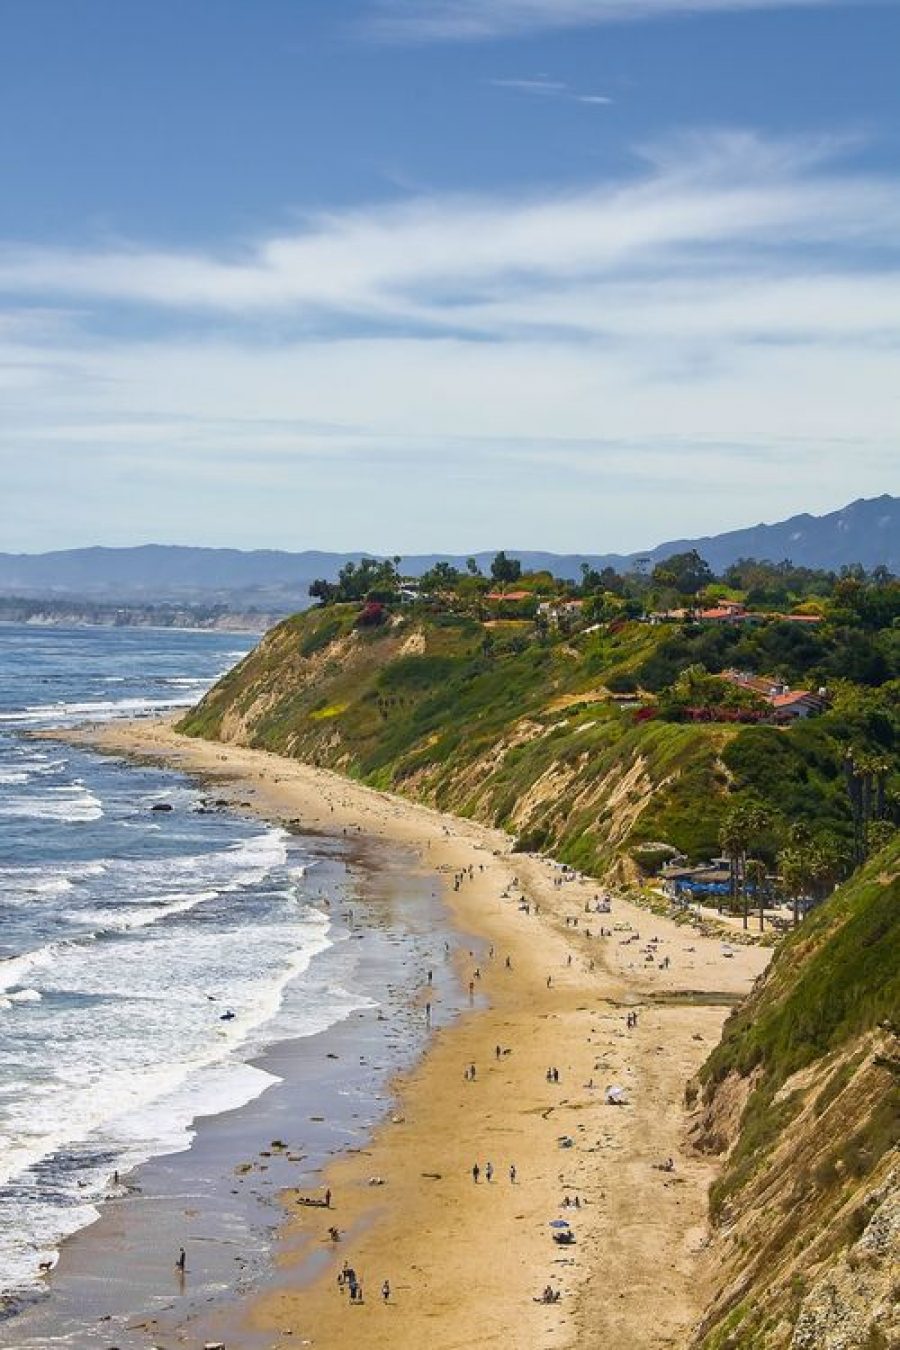 Santa Barbara, the most “California” town in all the west